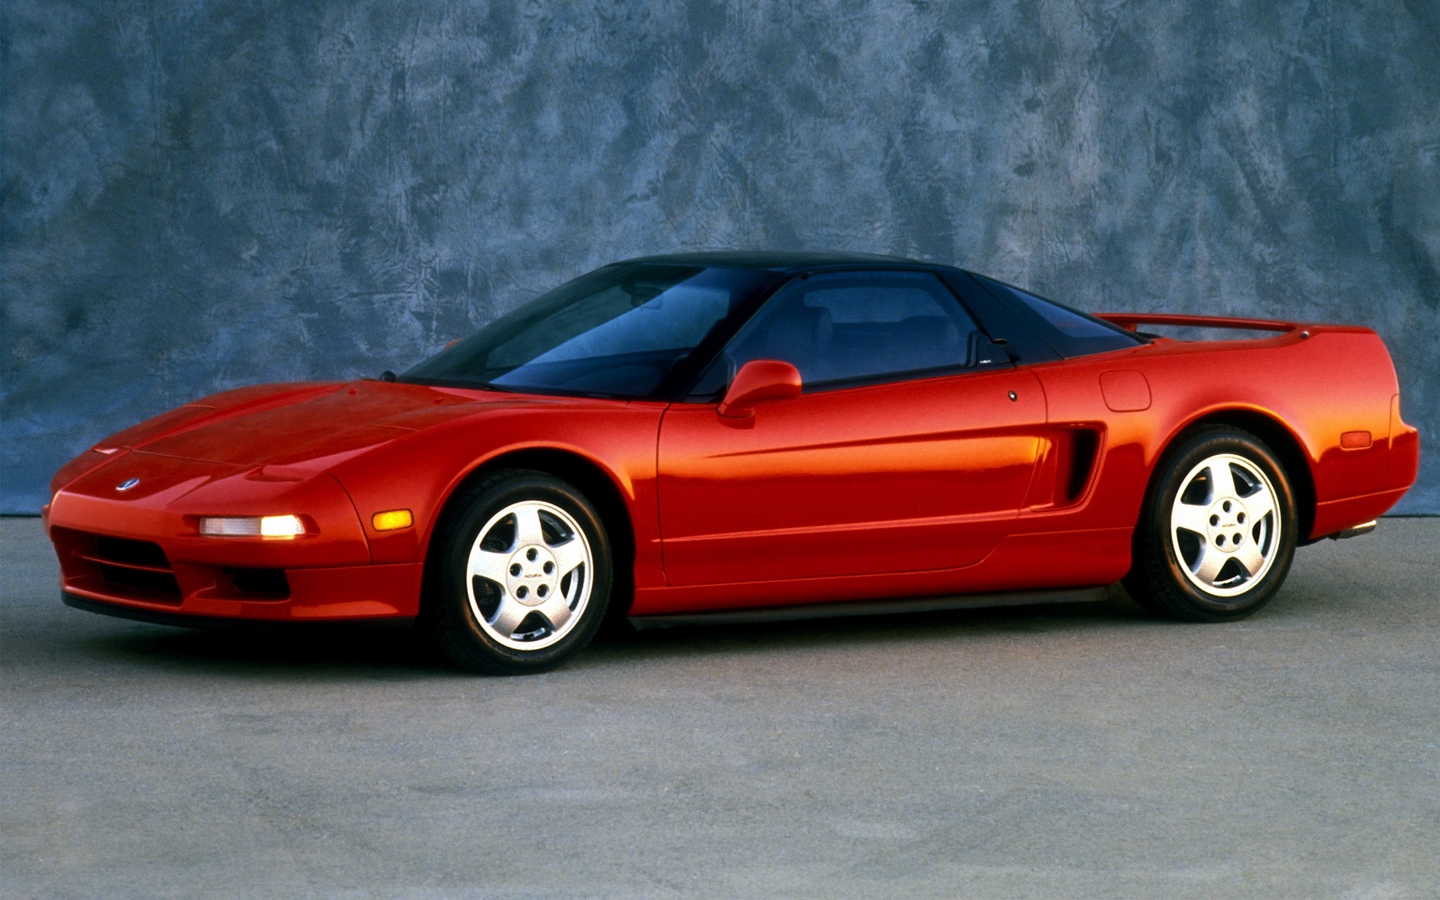 Acura NSX 1990 acura_nsx_red_sports_side_view_auto_style_13531_1440x900